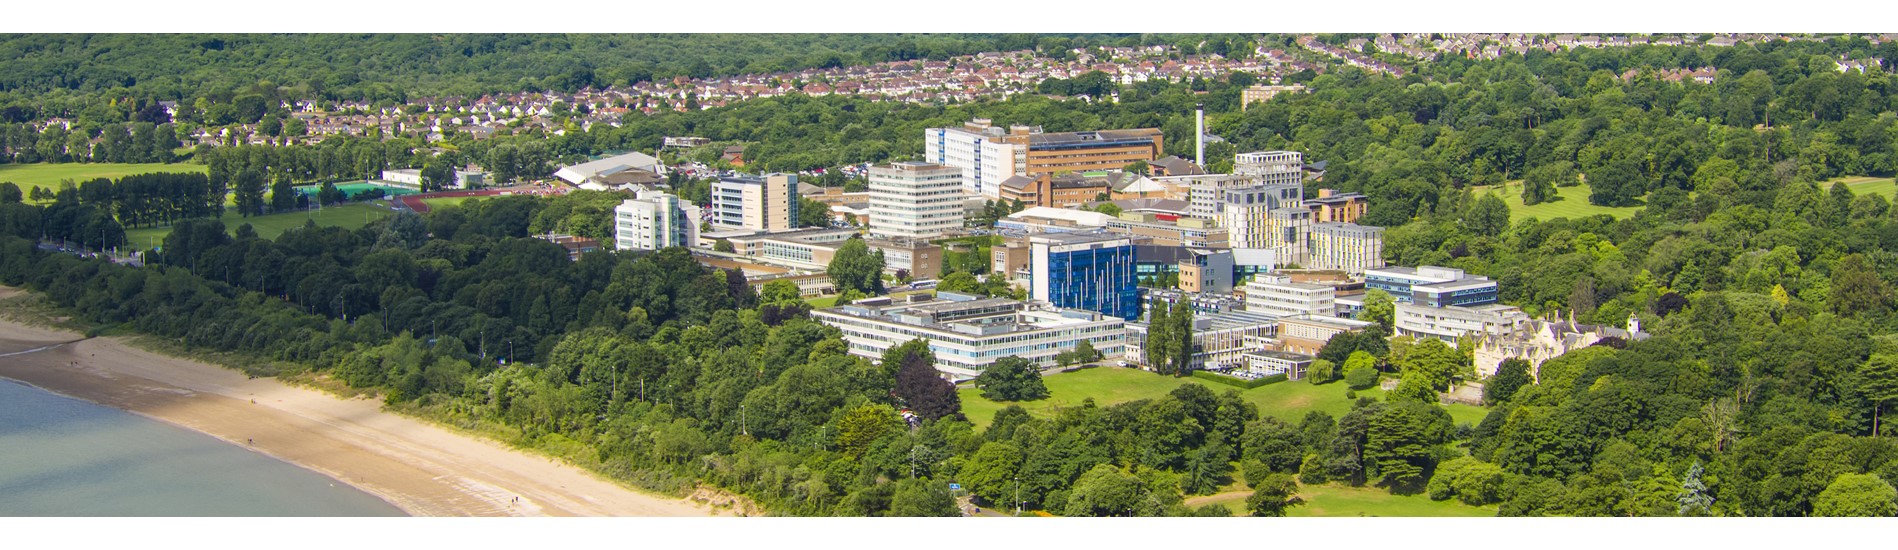 Areal view of Swansea University